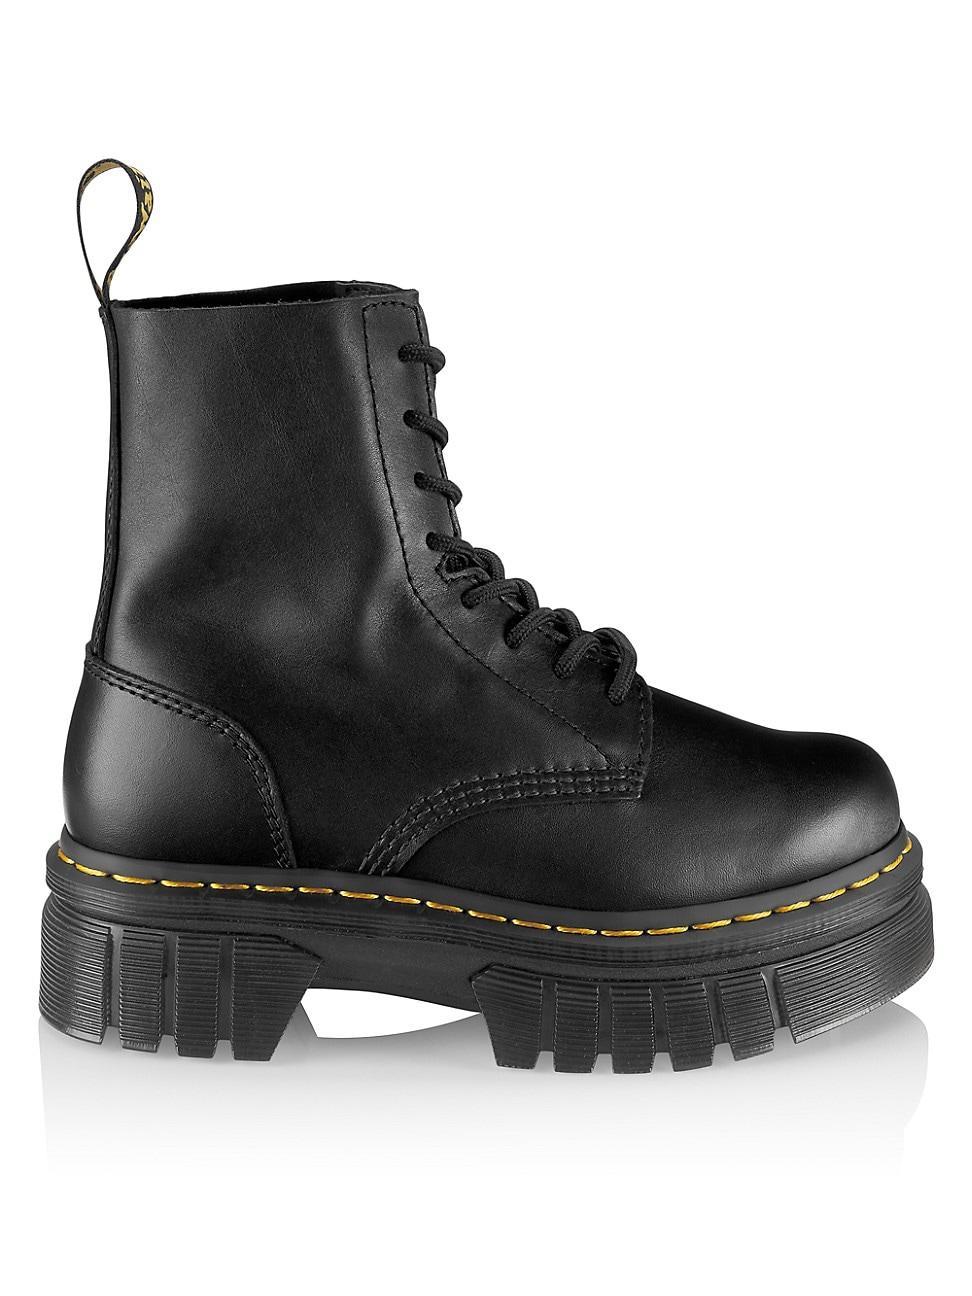 Womens Audrick 8-Eye Leather Combat Boots Product Image